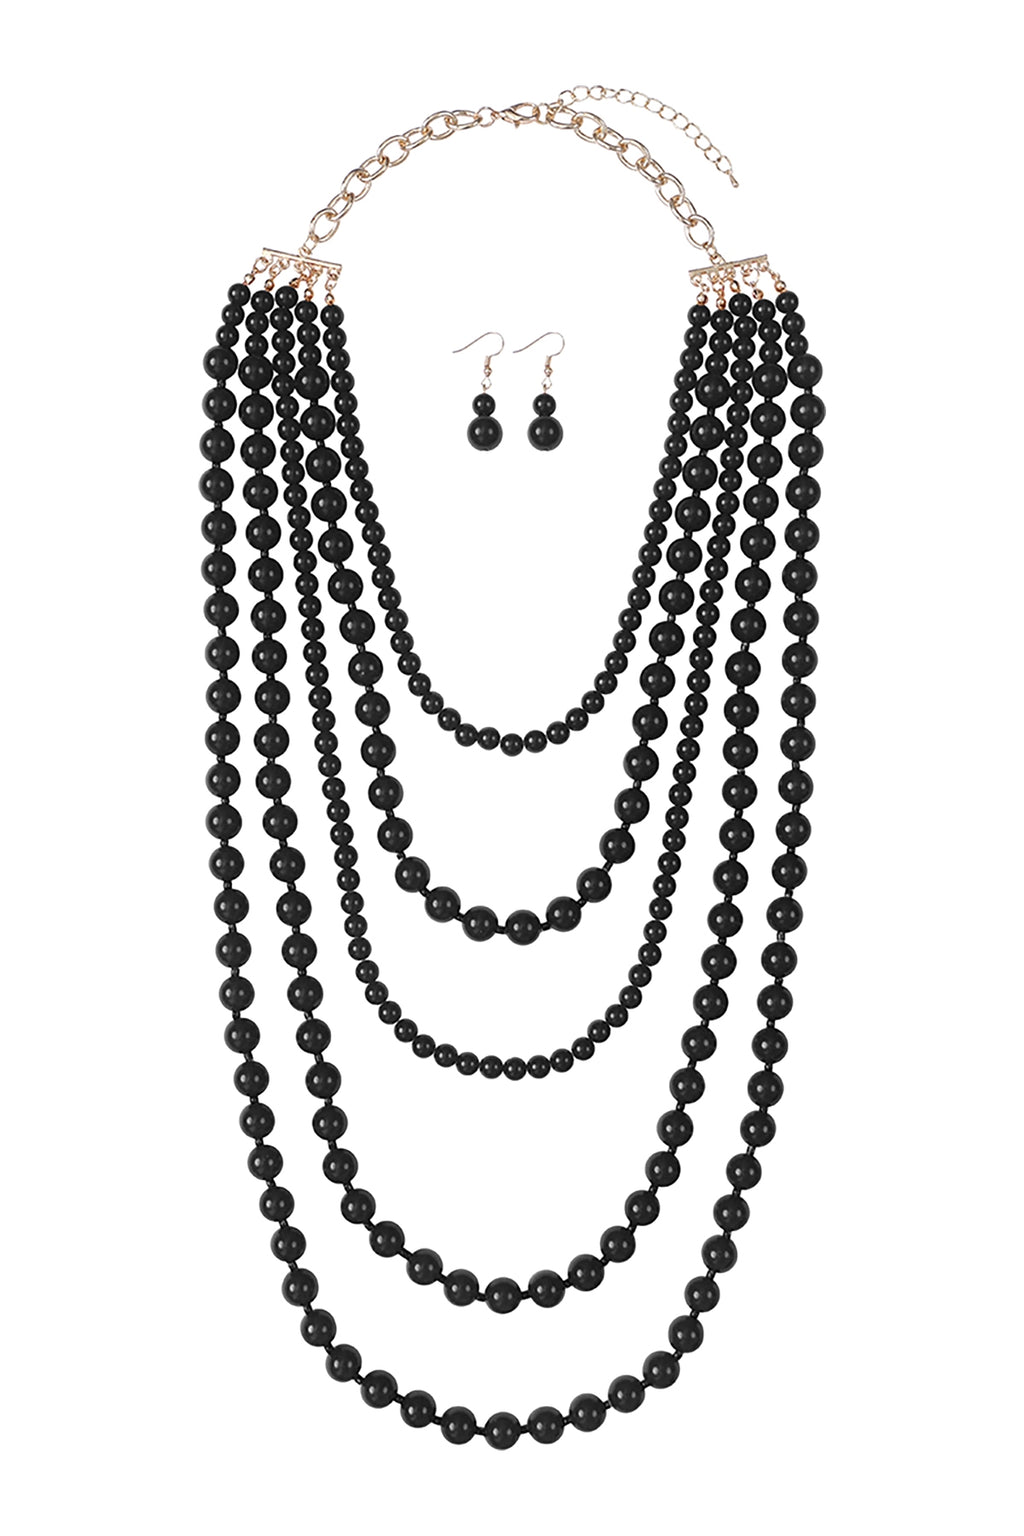 Multi Layered Beads Necklace and Earrings Set Black - Pack of 6